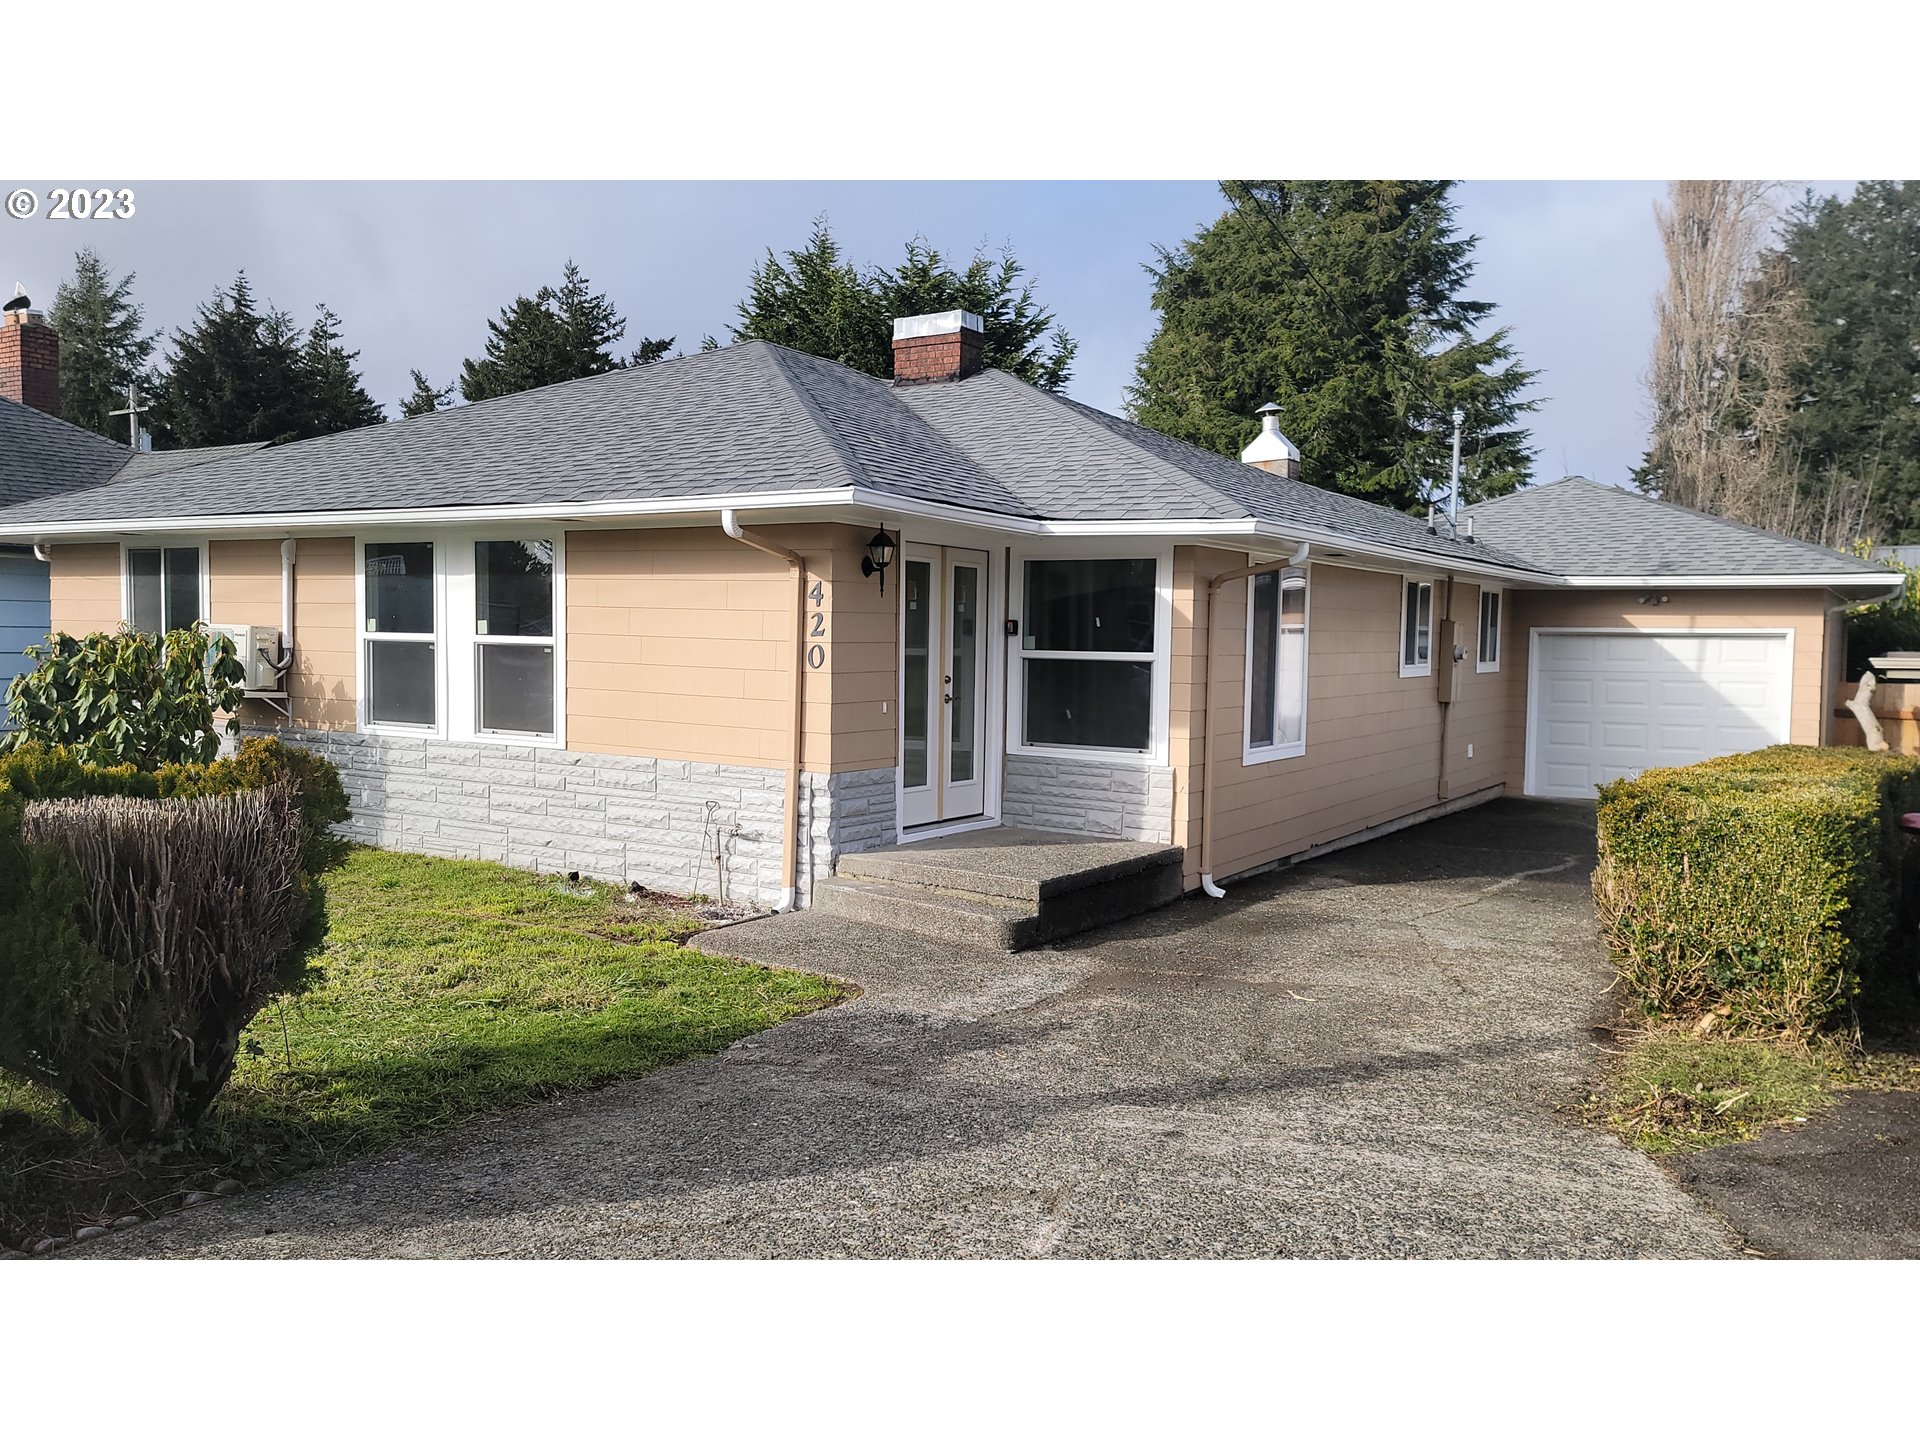 420 SIMPSON, North Bend, OR 97459